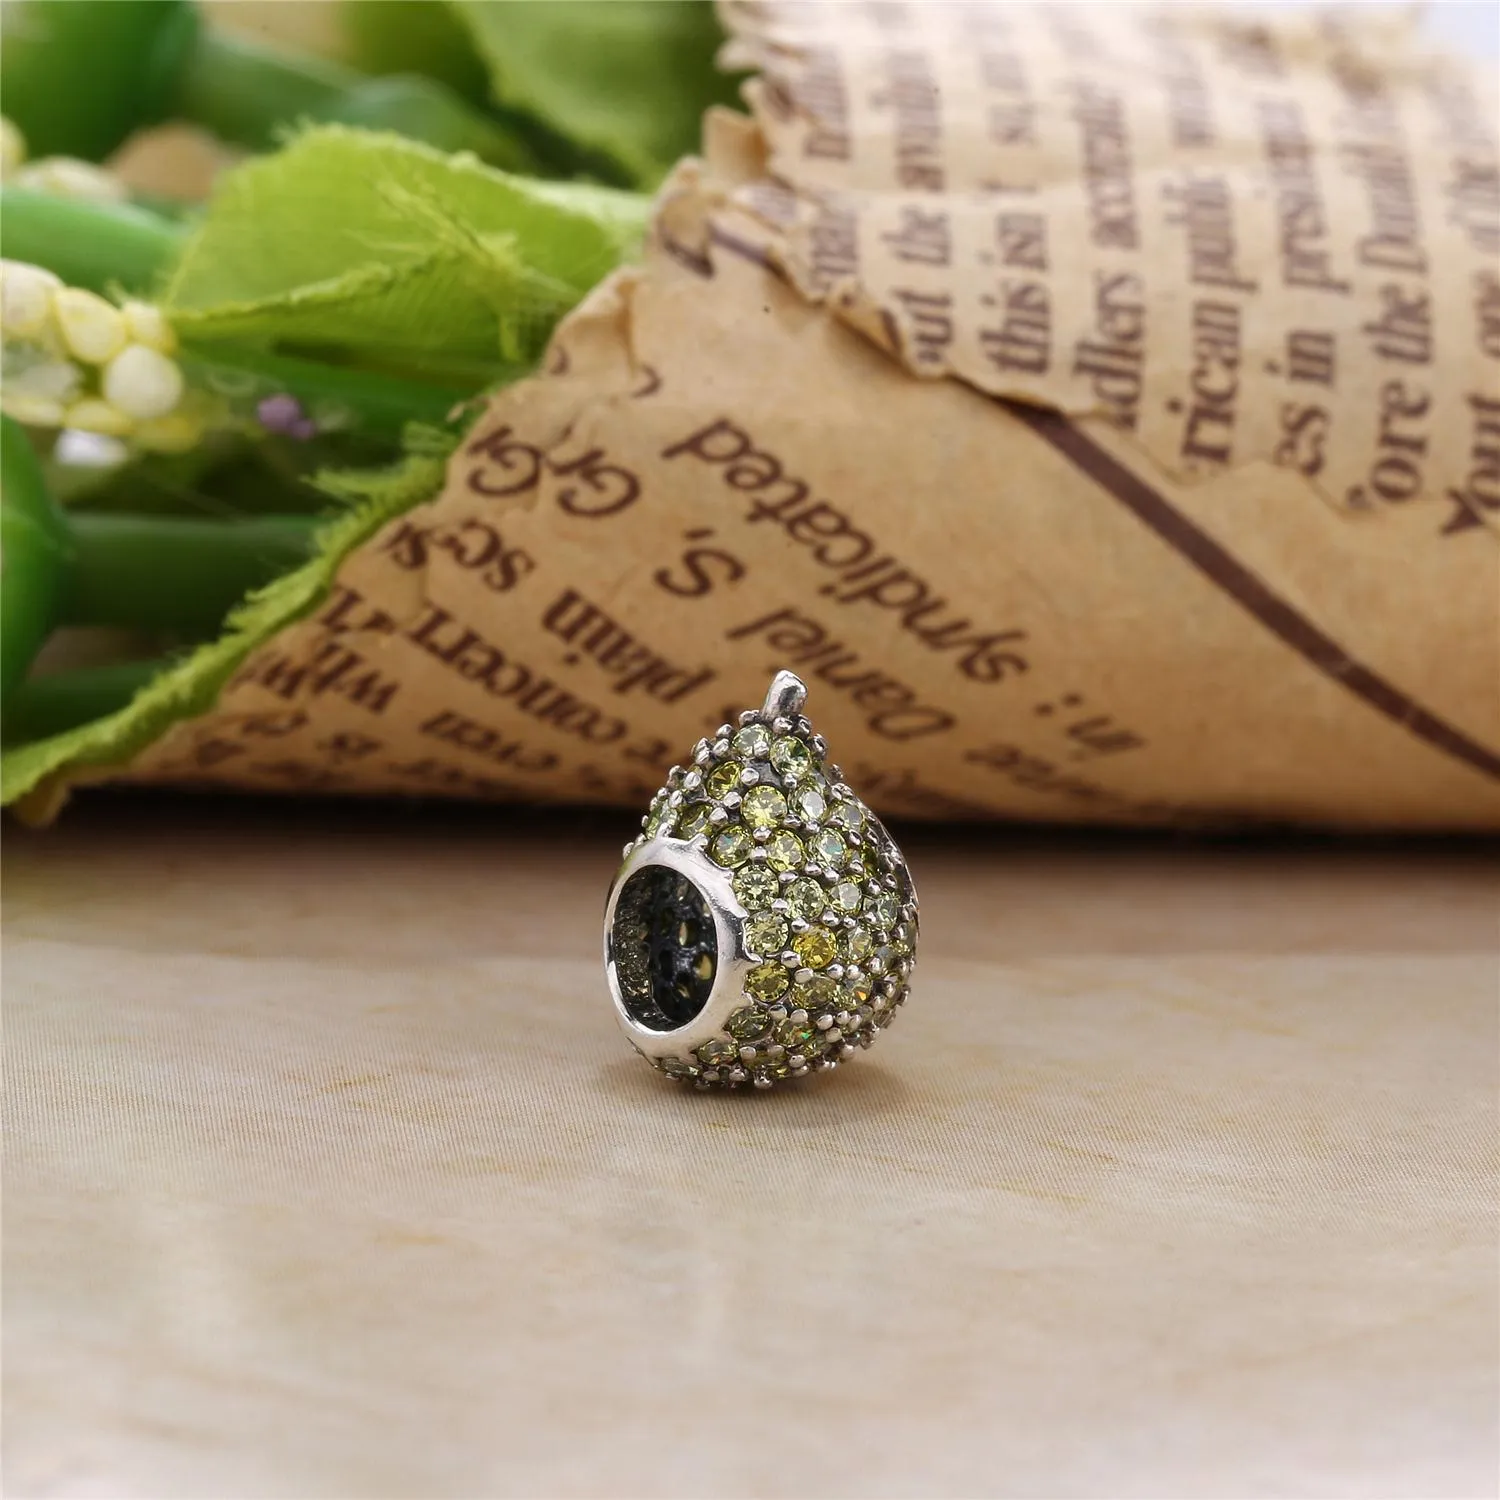 Pear silver charm with light green crystal - 791486NLG - Talisma